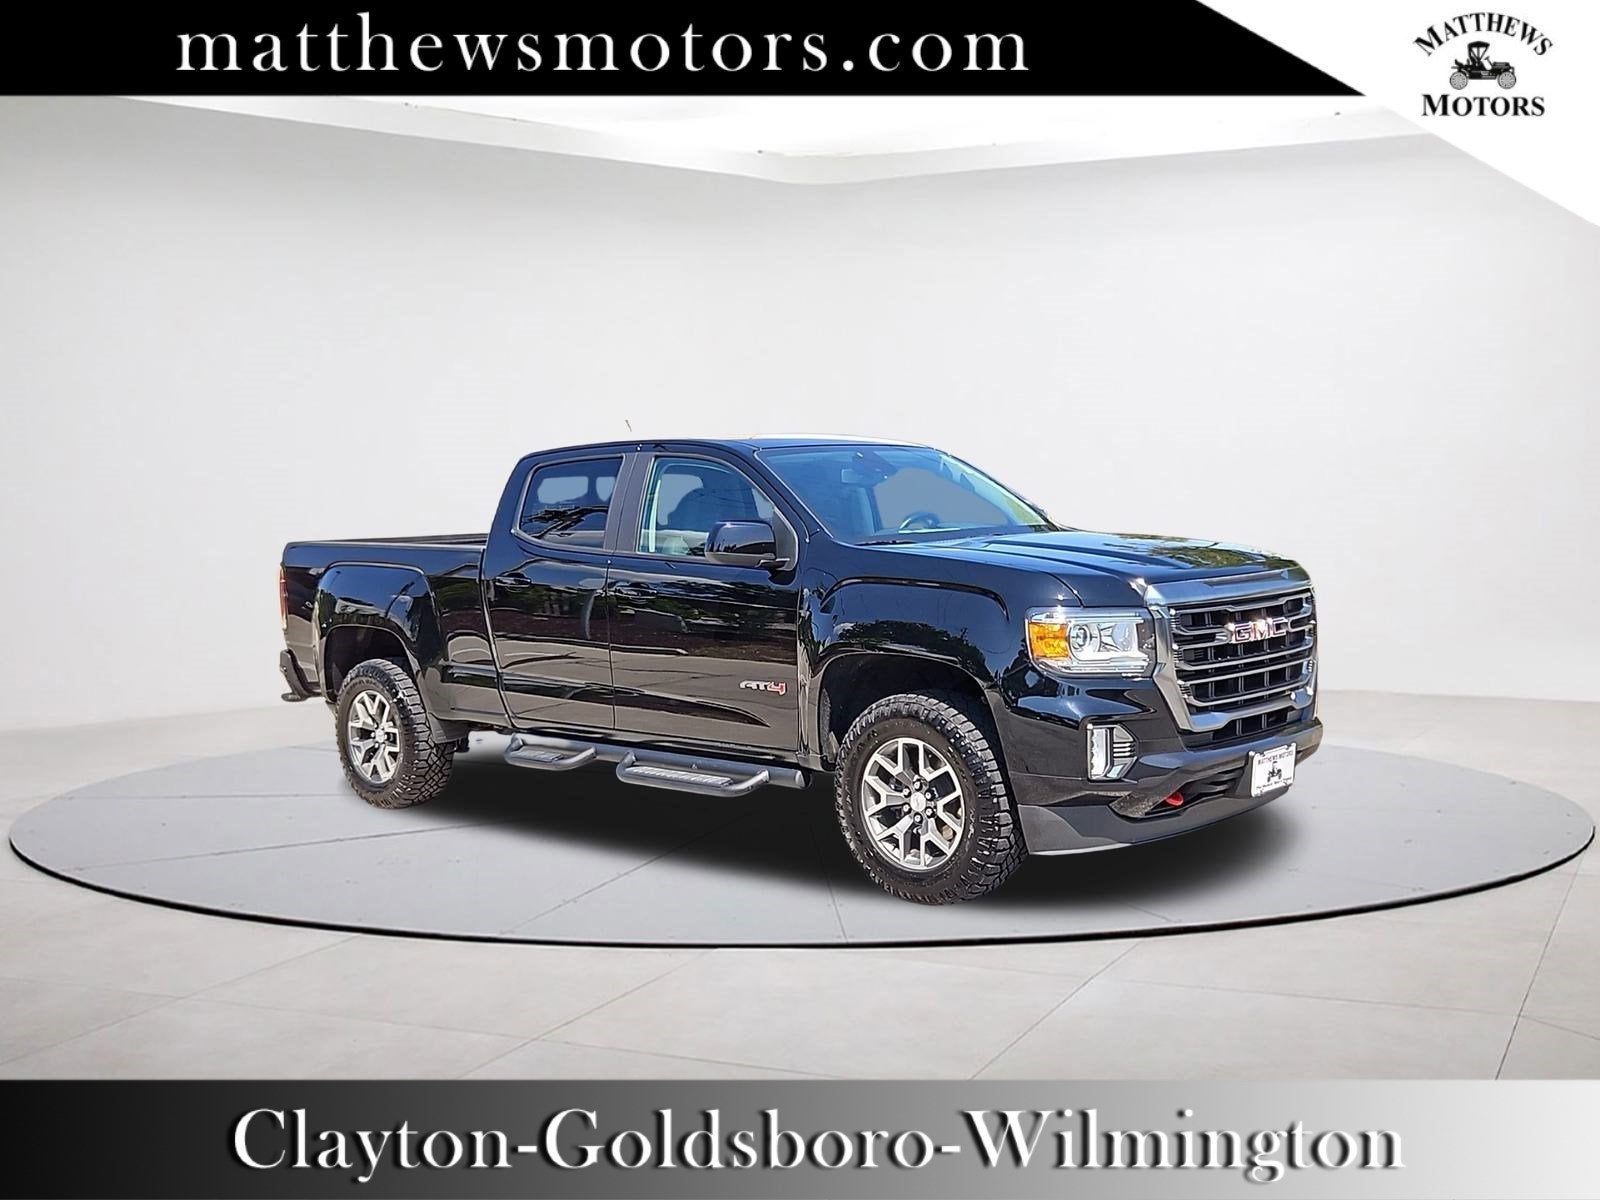 2021 GMC Canyon 4WD AT4 Crew Cab w/ Leather, Nav Drivers Alert Pkg.